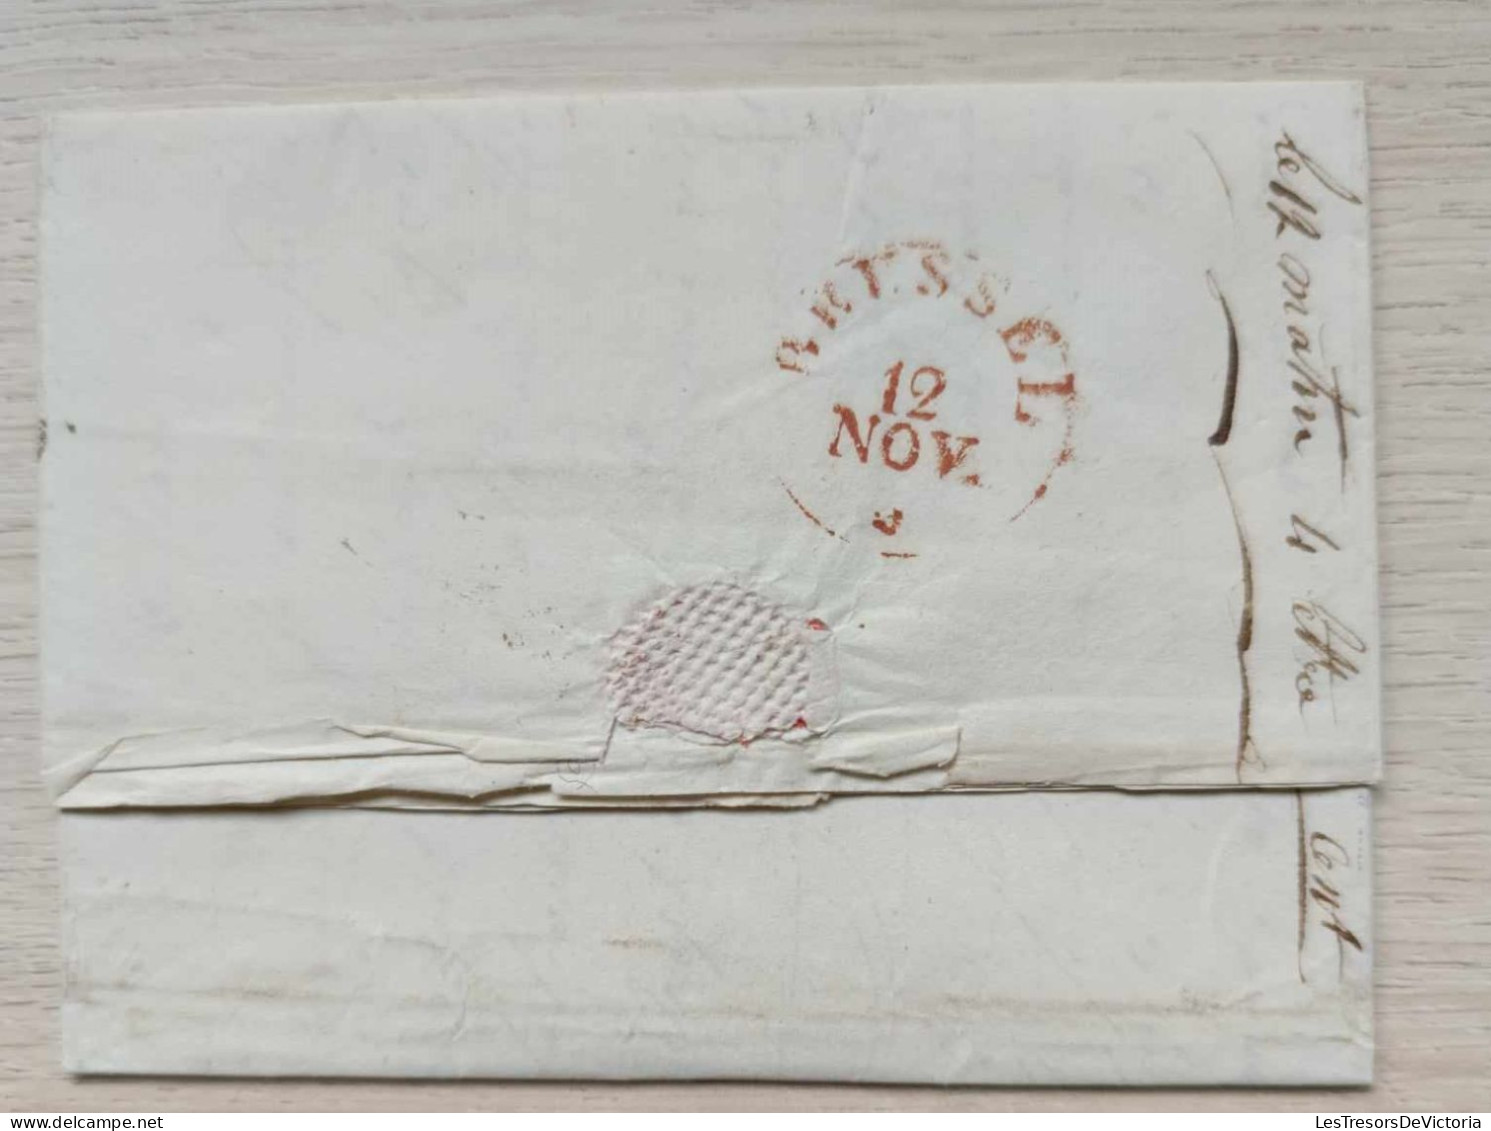 Belgique - Letter From Verviers Mailed On November 21st 1829 To Brussels - Weight 16ws Wigtjes - 1815-1830 (Période Hollandaise)